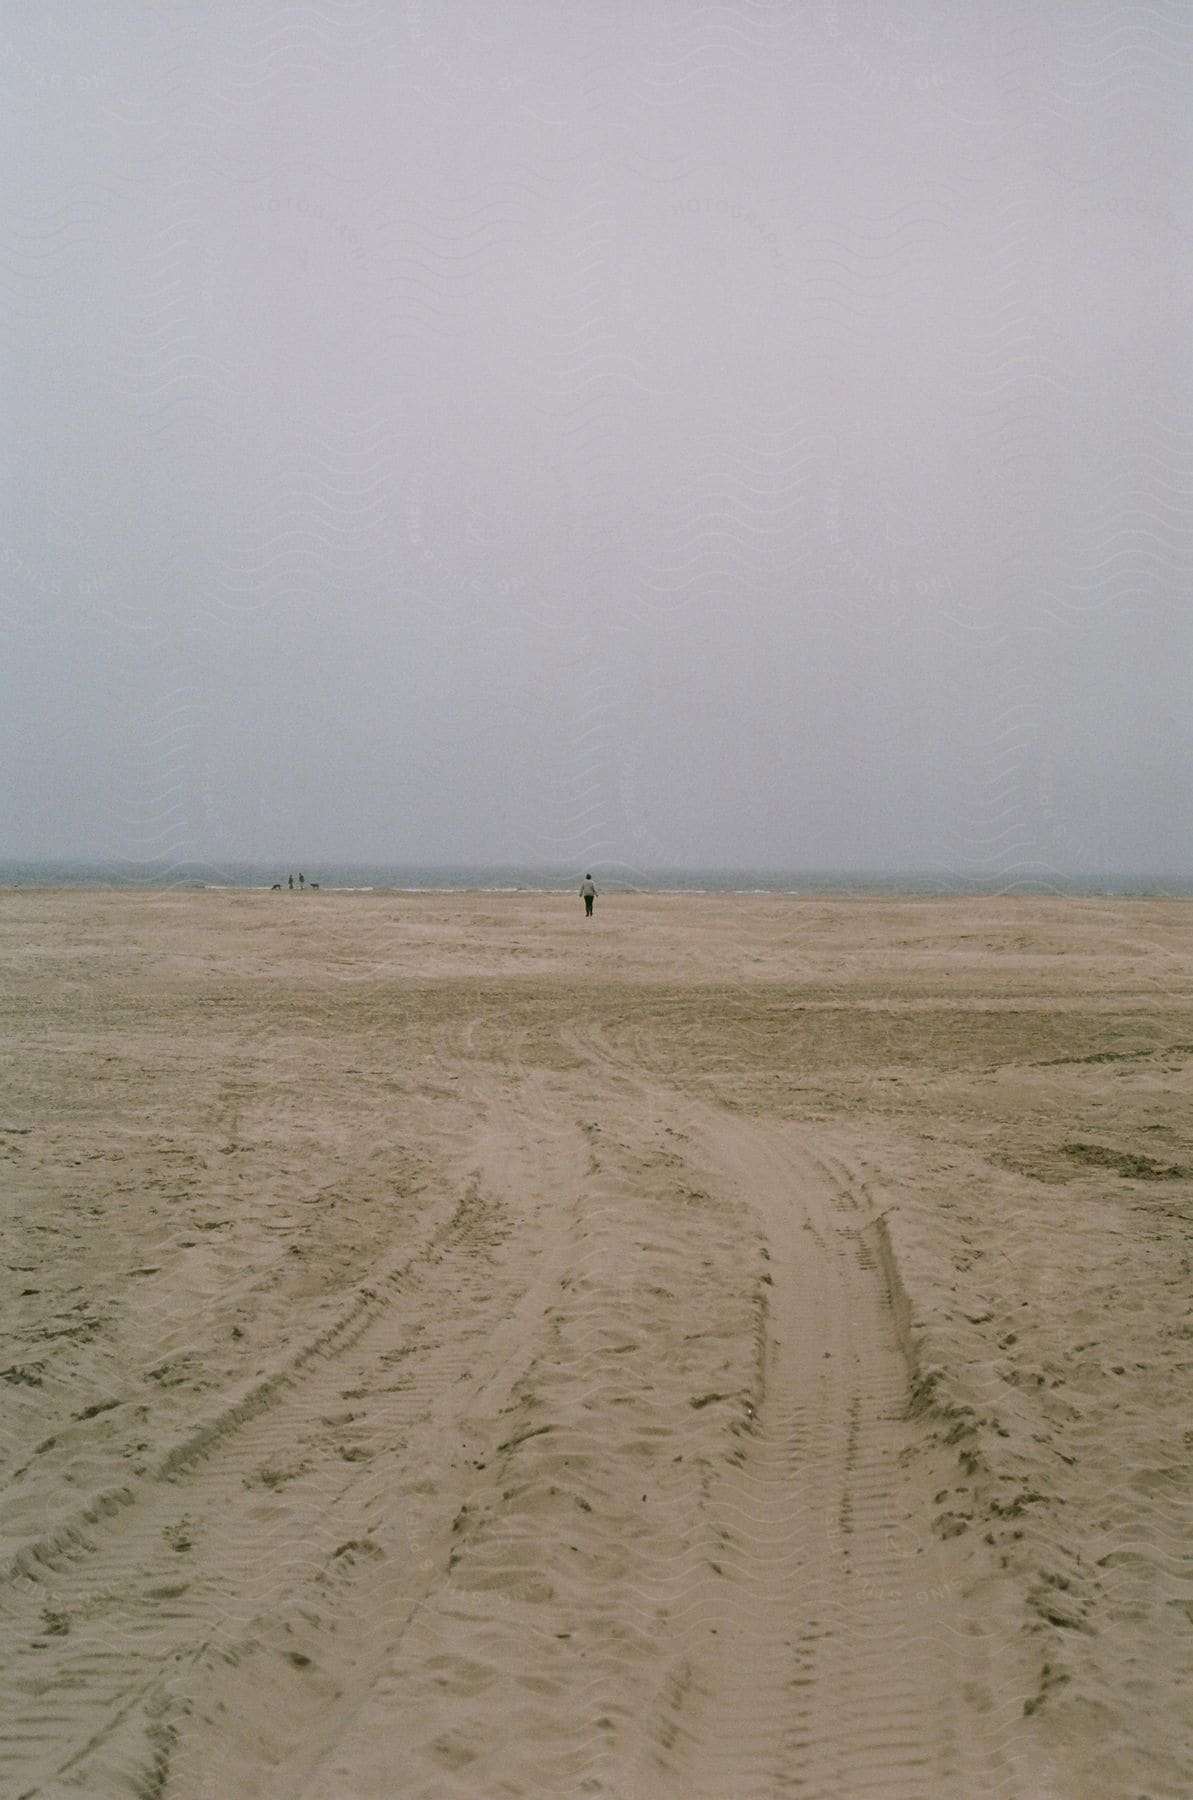 A beach with tire marks on the sand, and one person walking alone towards the sea